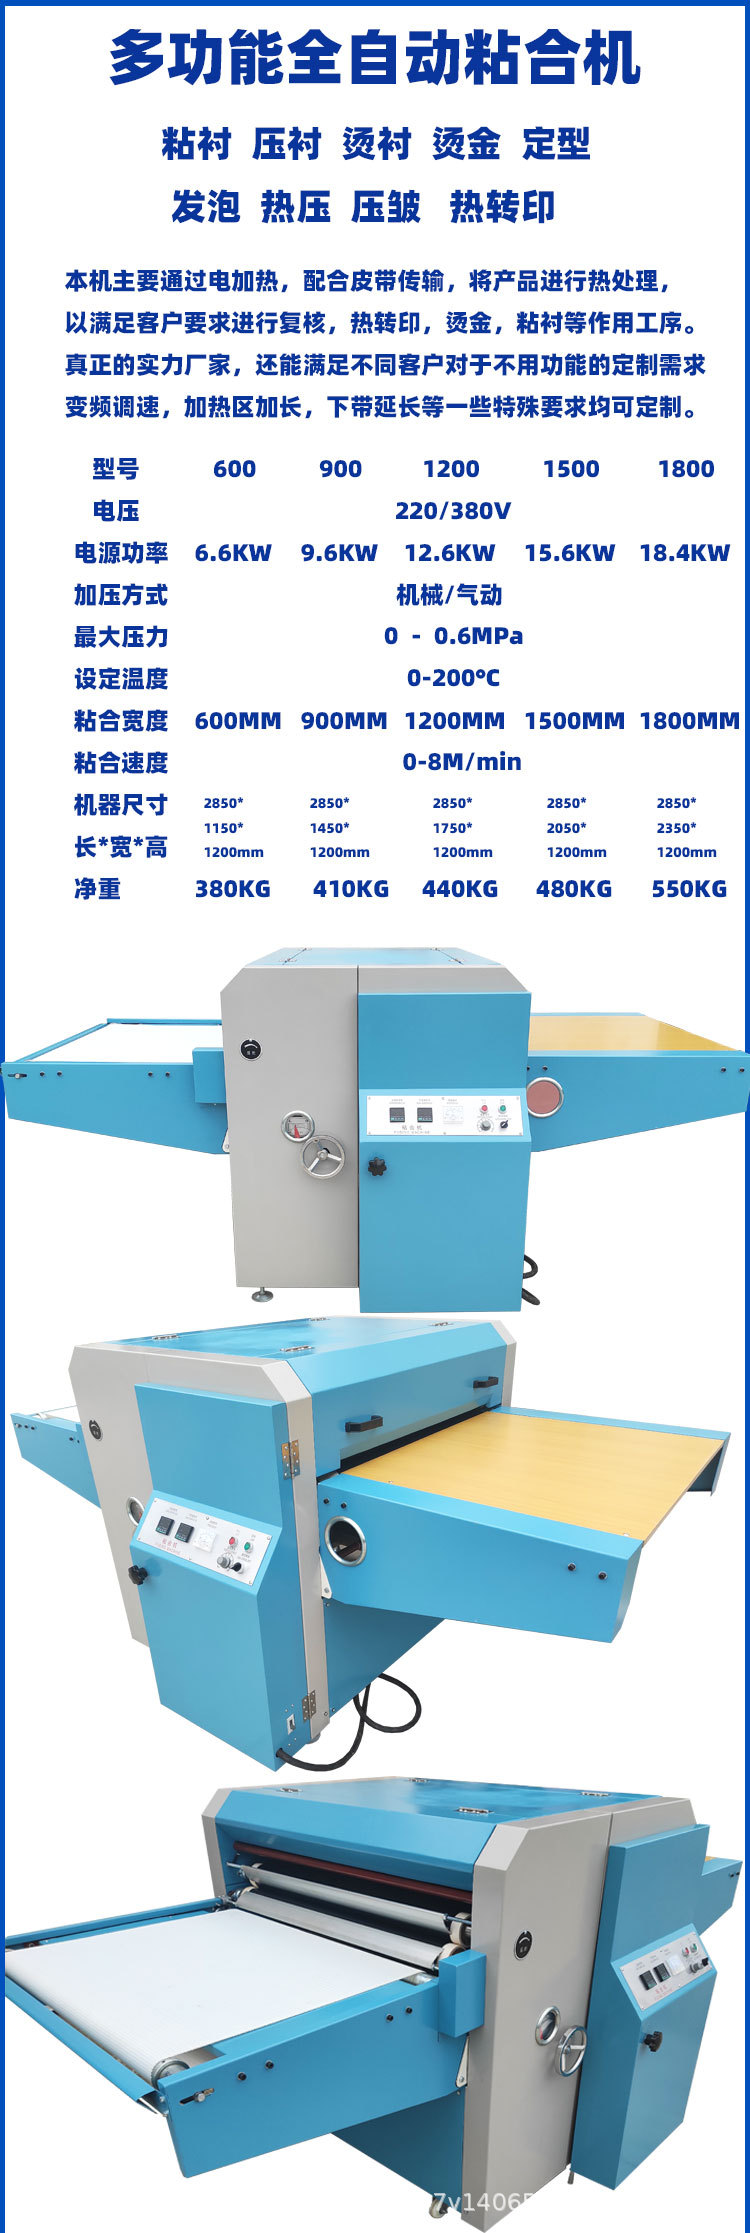 Clothing fabric, leather, shoe material, whole roll, large high-speed composite machine, bonding machine, hot stamping, lining, adhesive lining, wrinkling and shaping